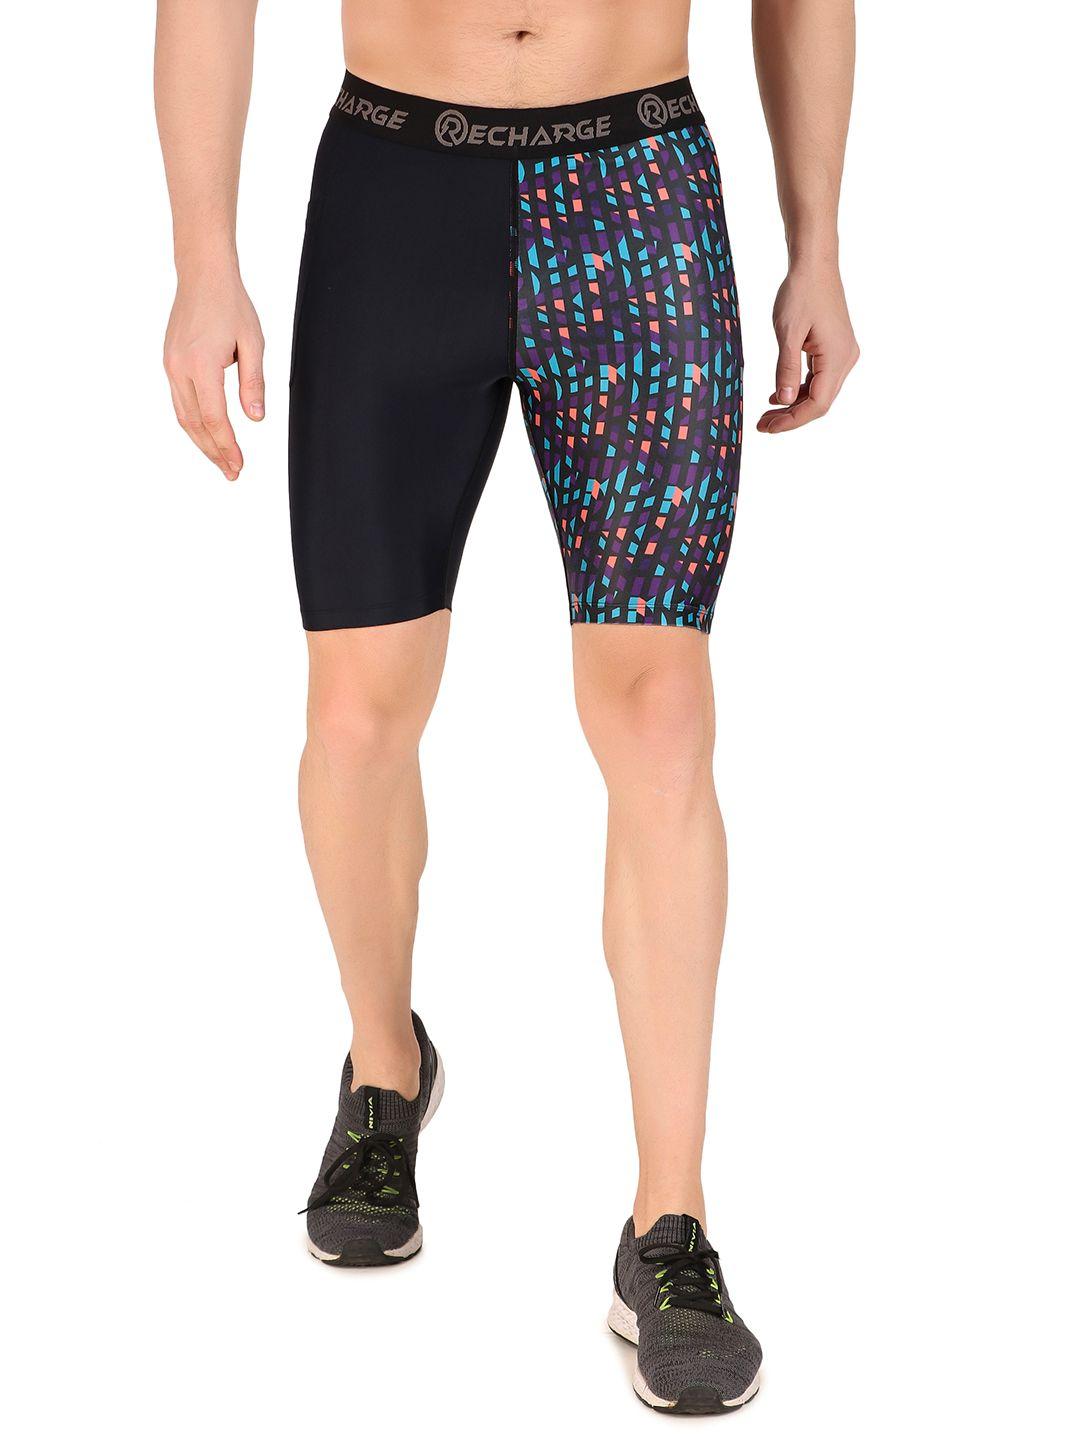 redesign men printed dry fit technology shorts tights